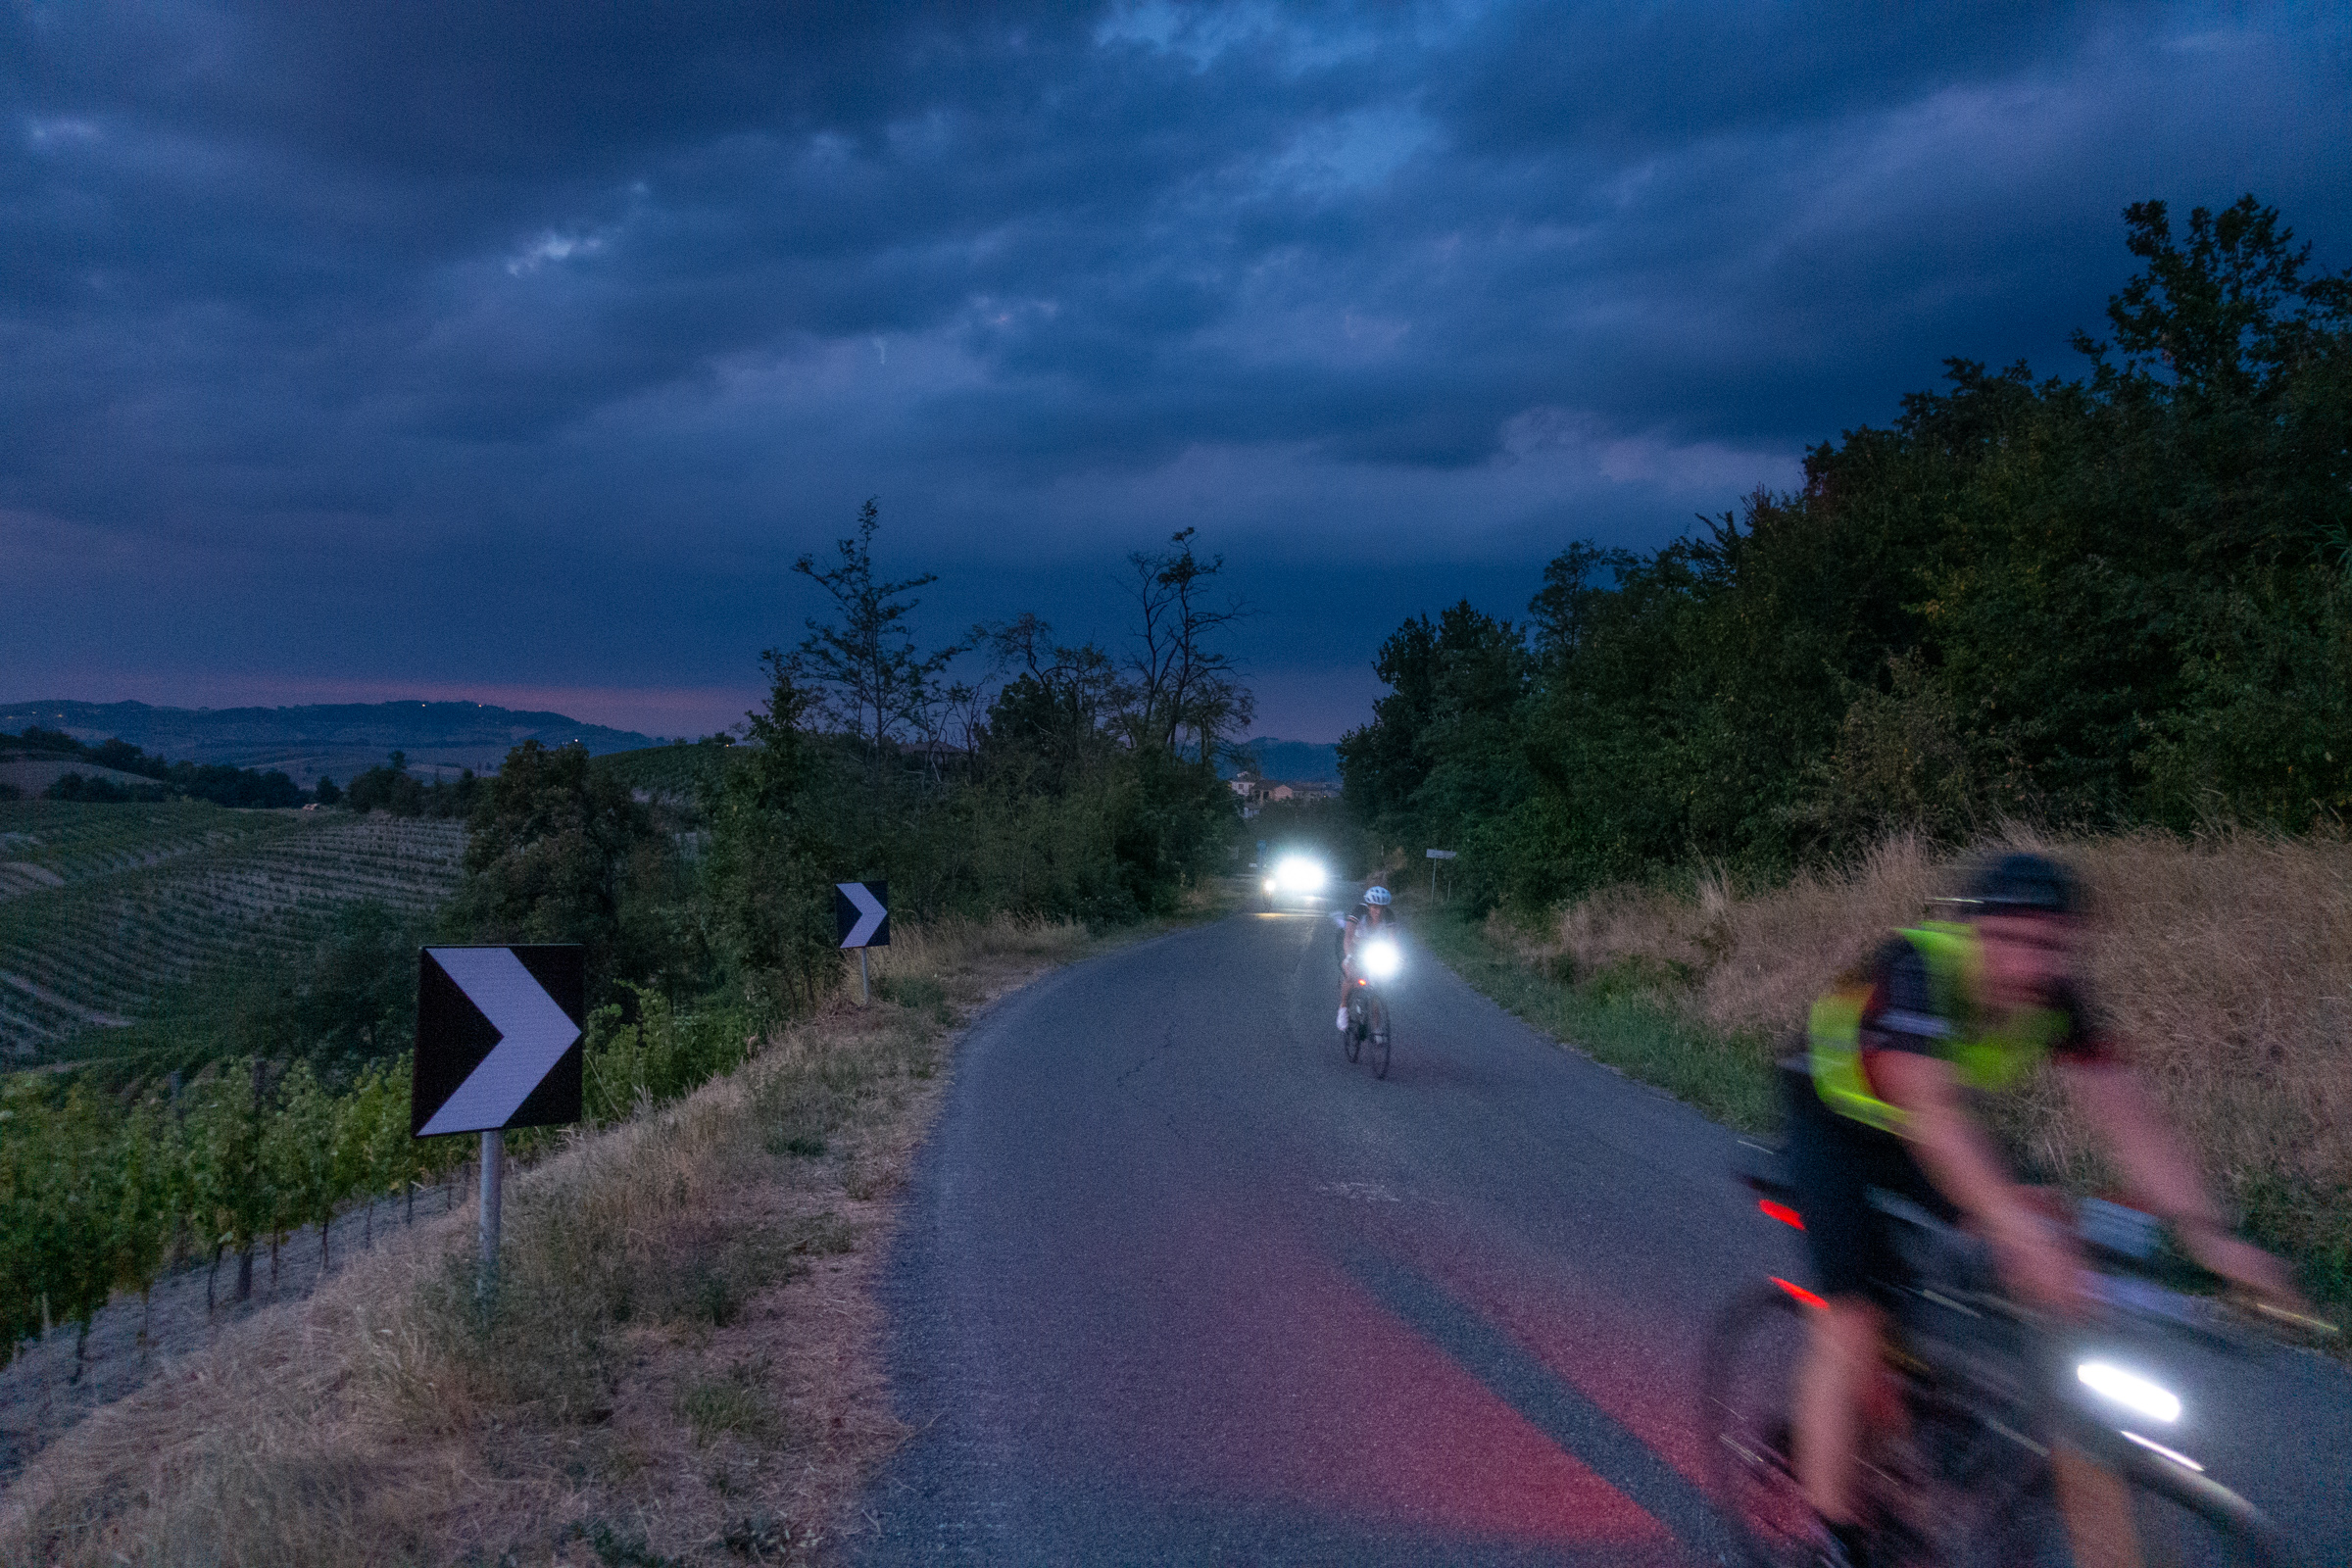 It got dark before we arrived at CP 1